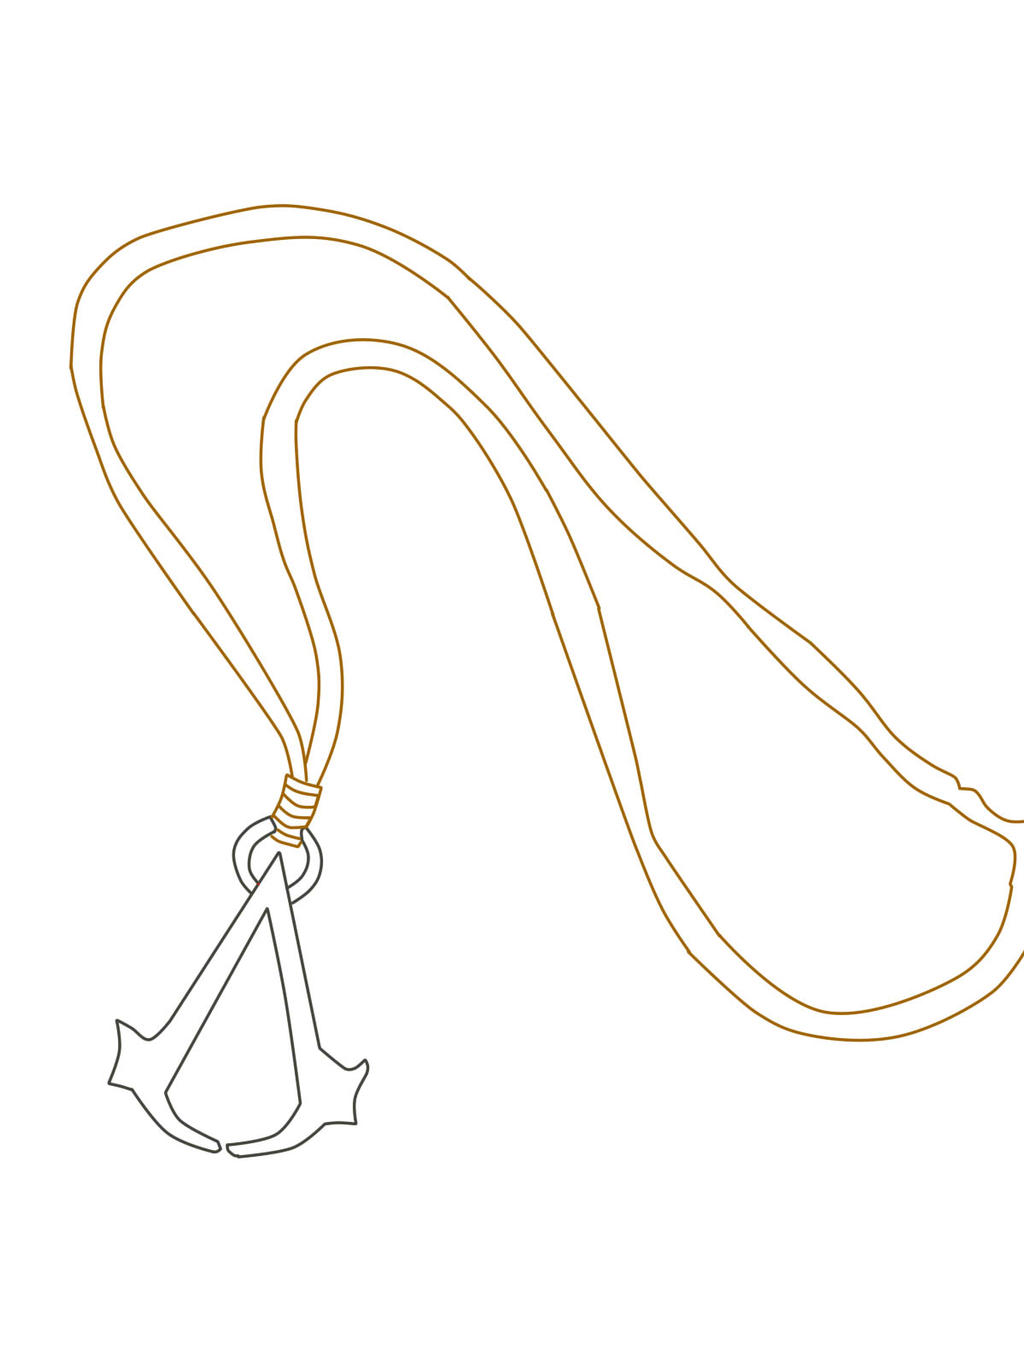 Assassin's Creed necklace lineart